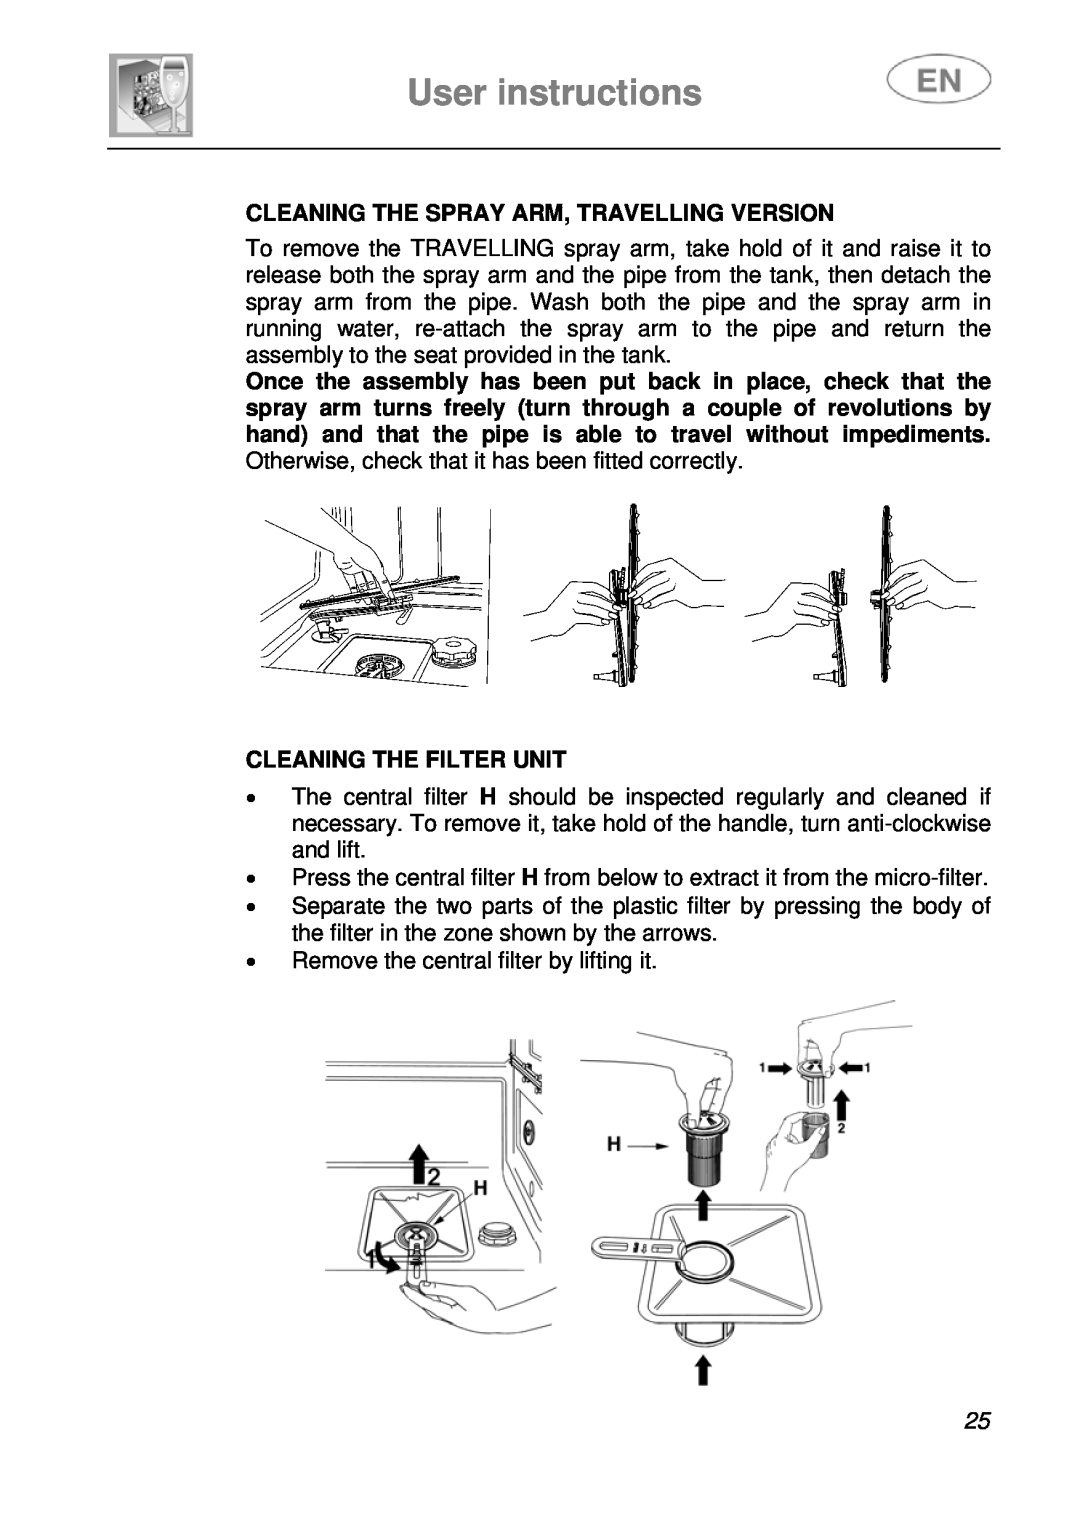 CDA WC460 manual User instructions, Cleaning The Spray Arm, Travelling Version, Cleaning The Filter Unit 